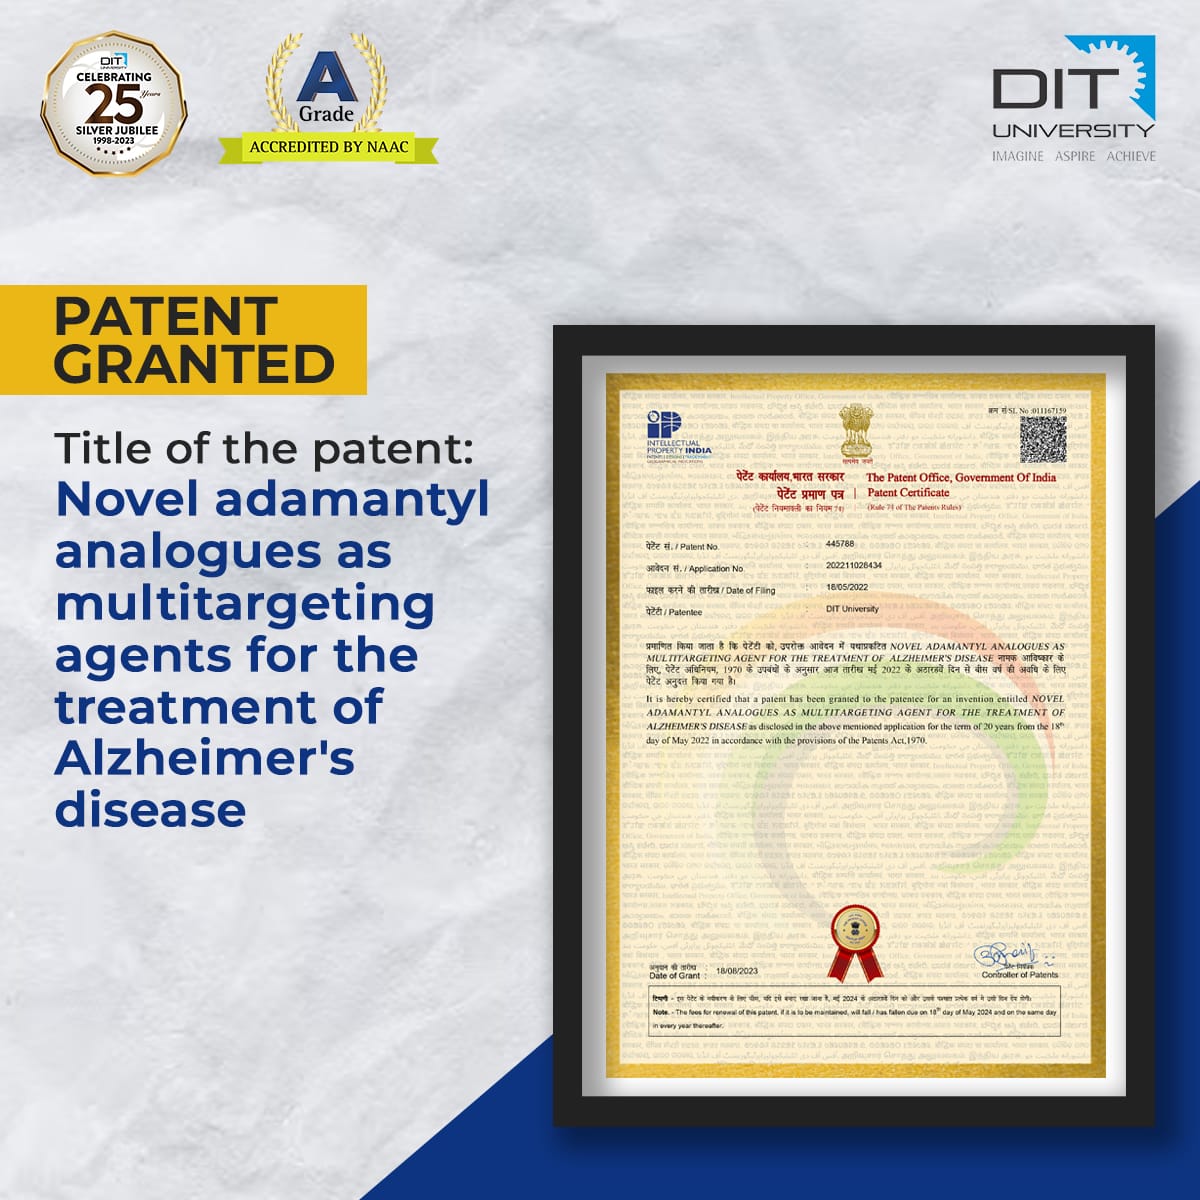 IPR Patent- Novel adamantyl analogues as multitargeting agents for the treatment of Alzheimer's disease